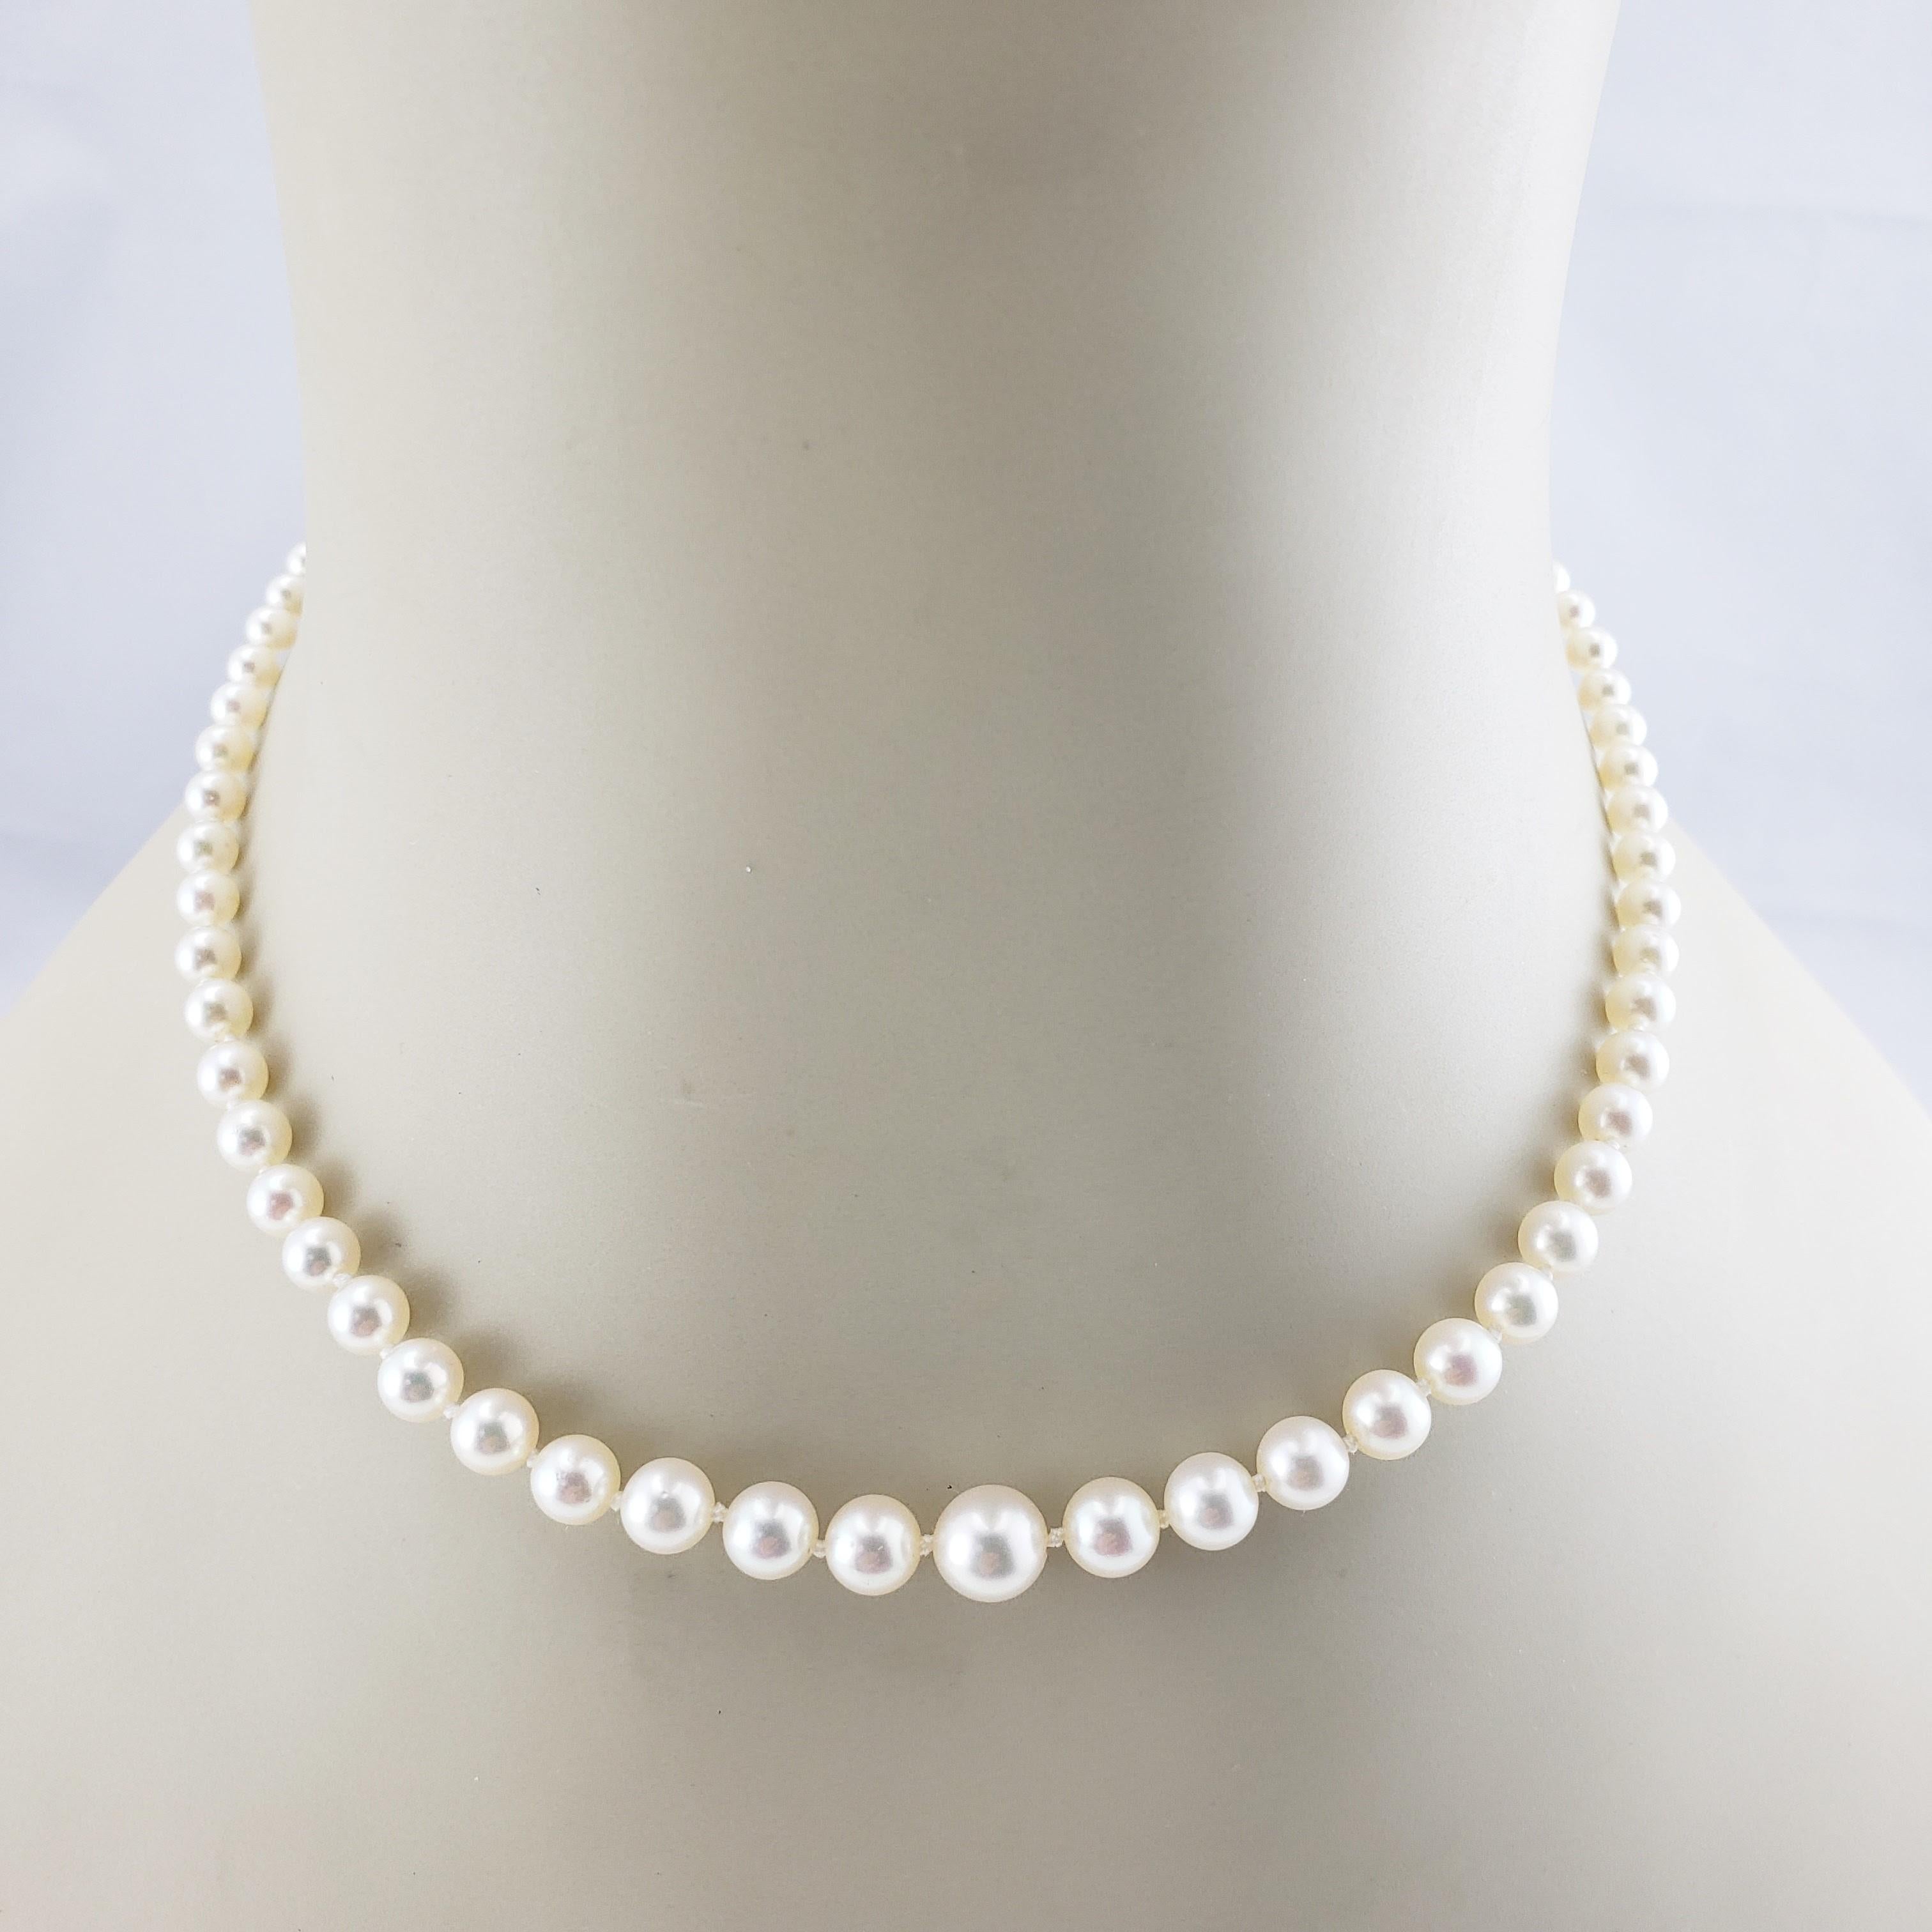 Vintage Graduated Cultured Pearl Necklace with 14 Karat White Gold Closure For Sale 1